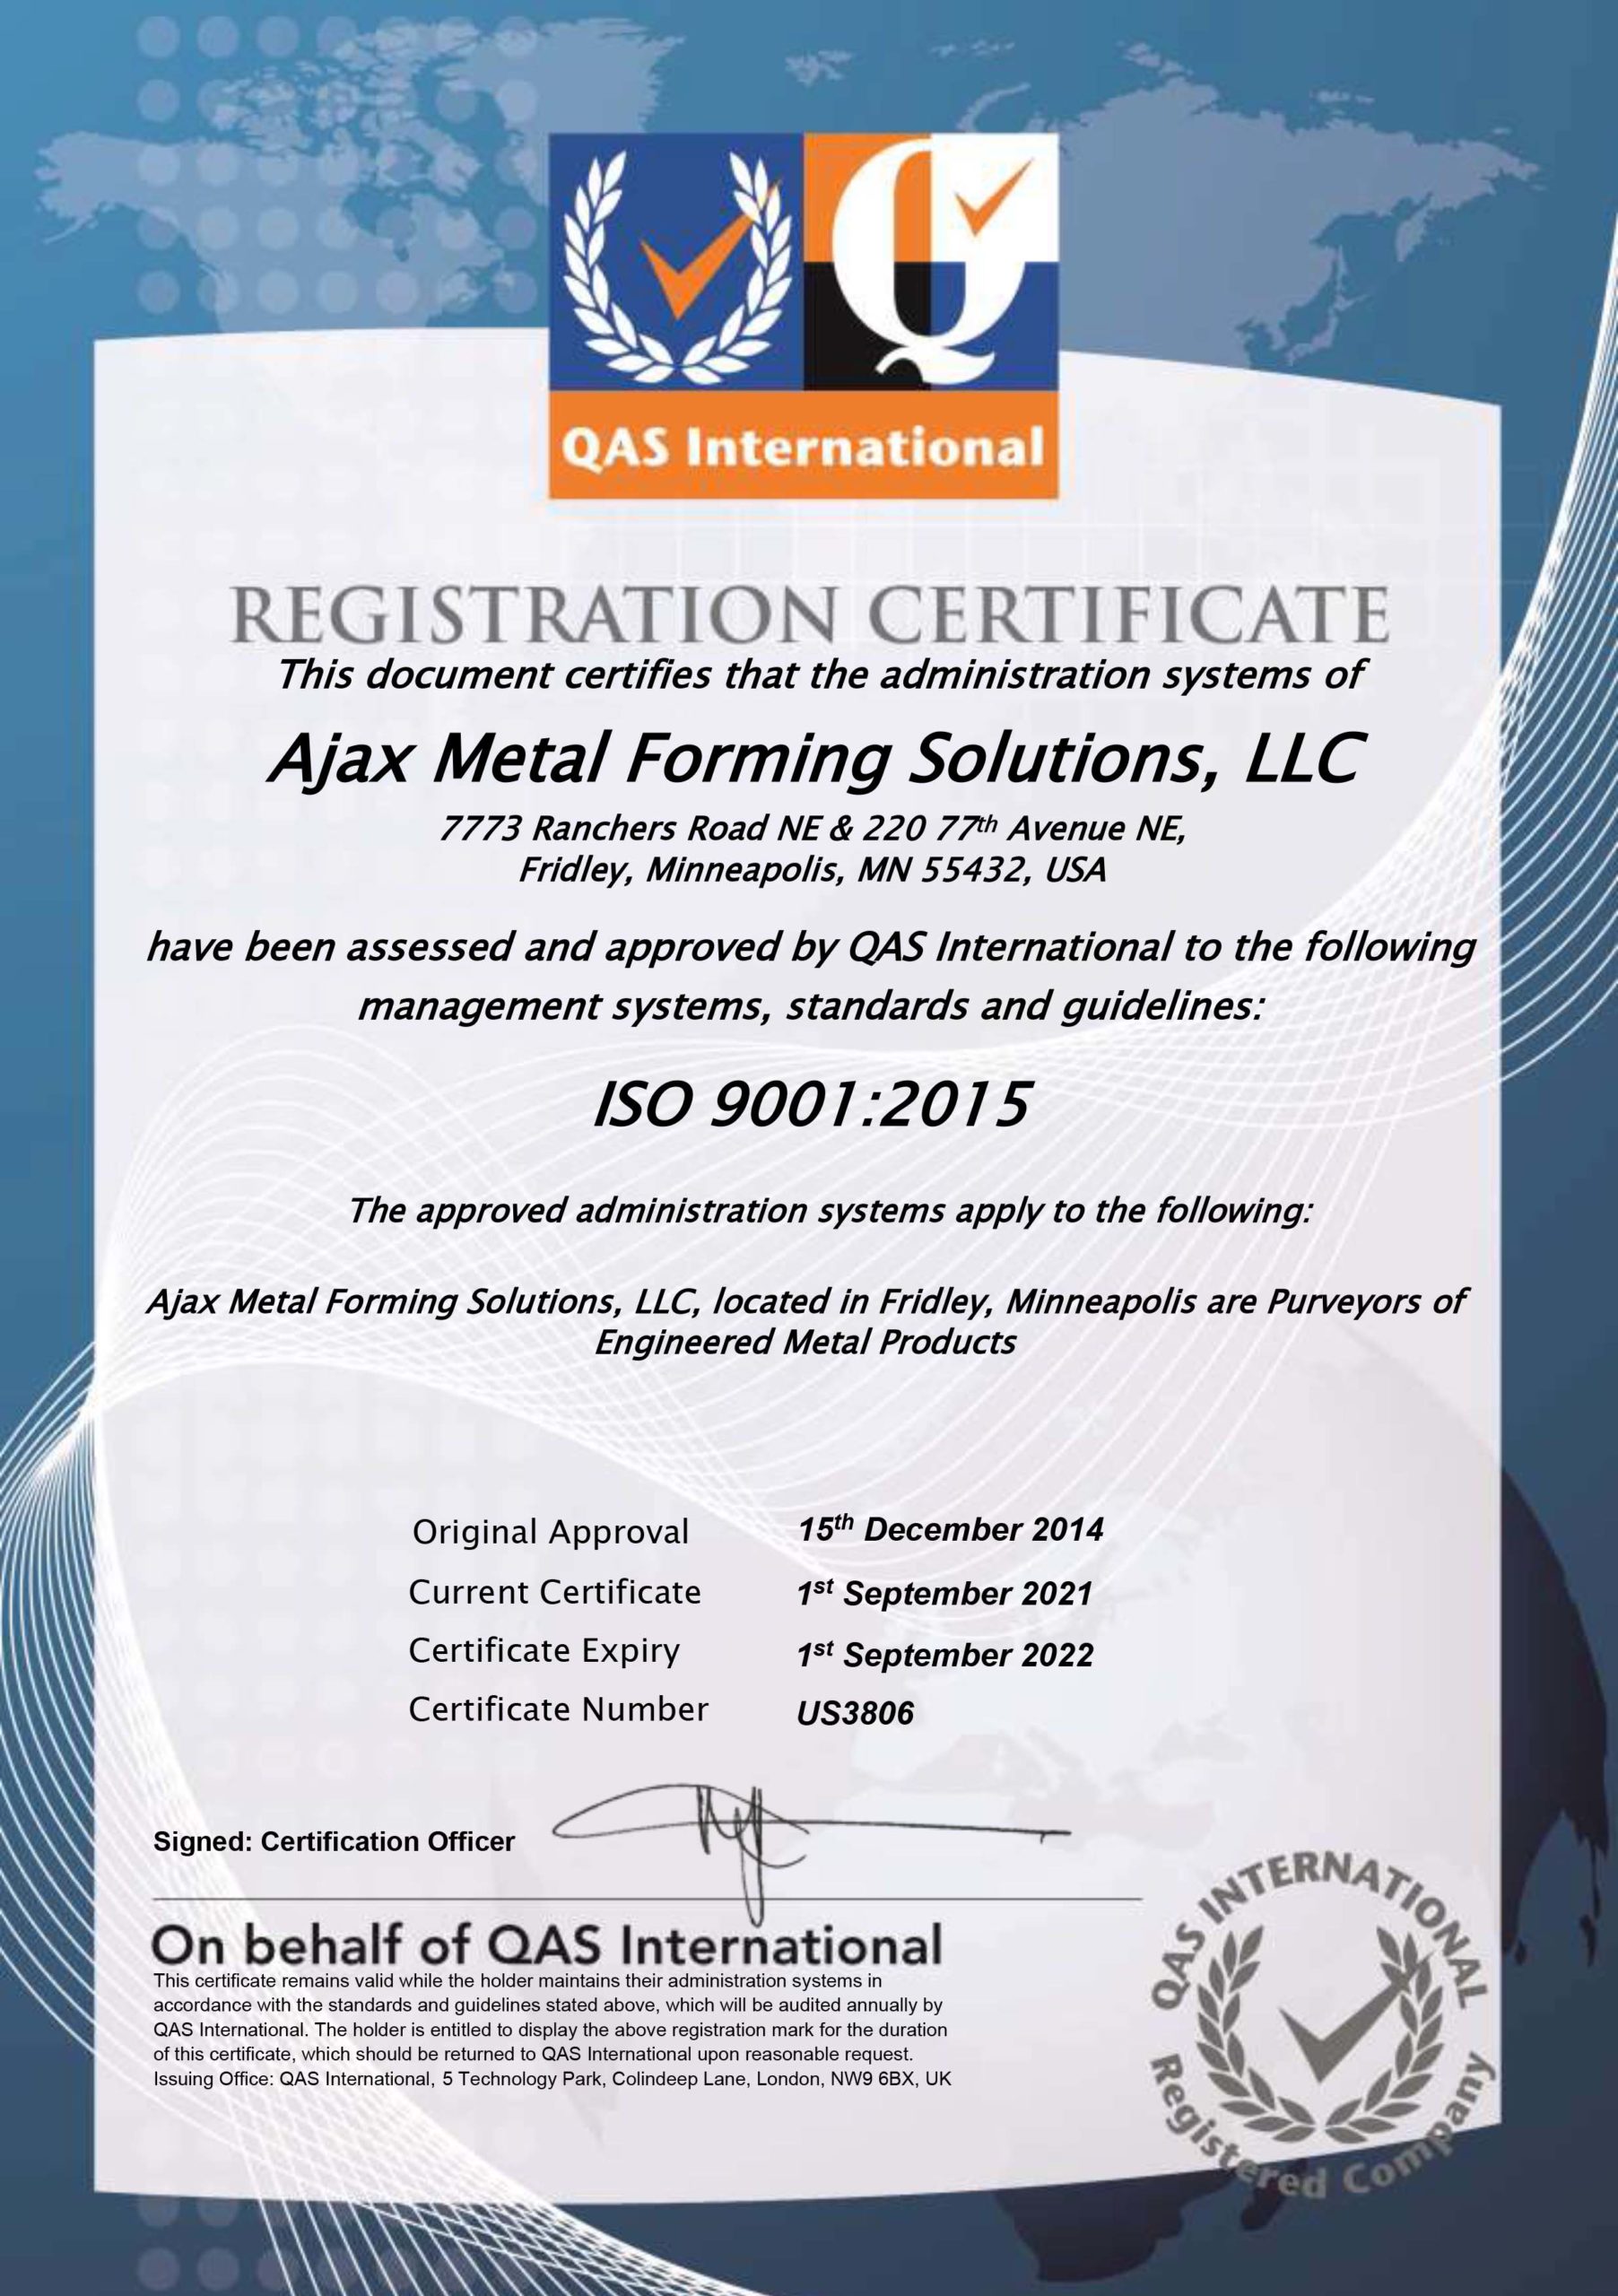 Ajax is an ISO Registered Company | Certificate Number US3806